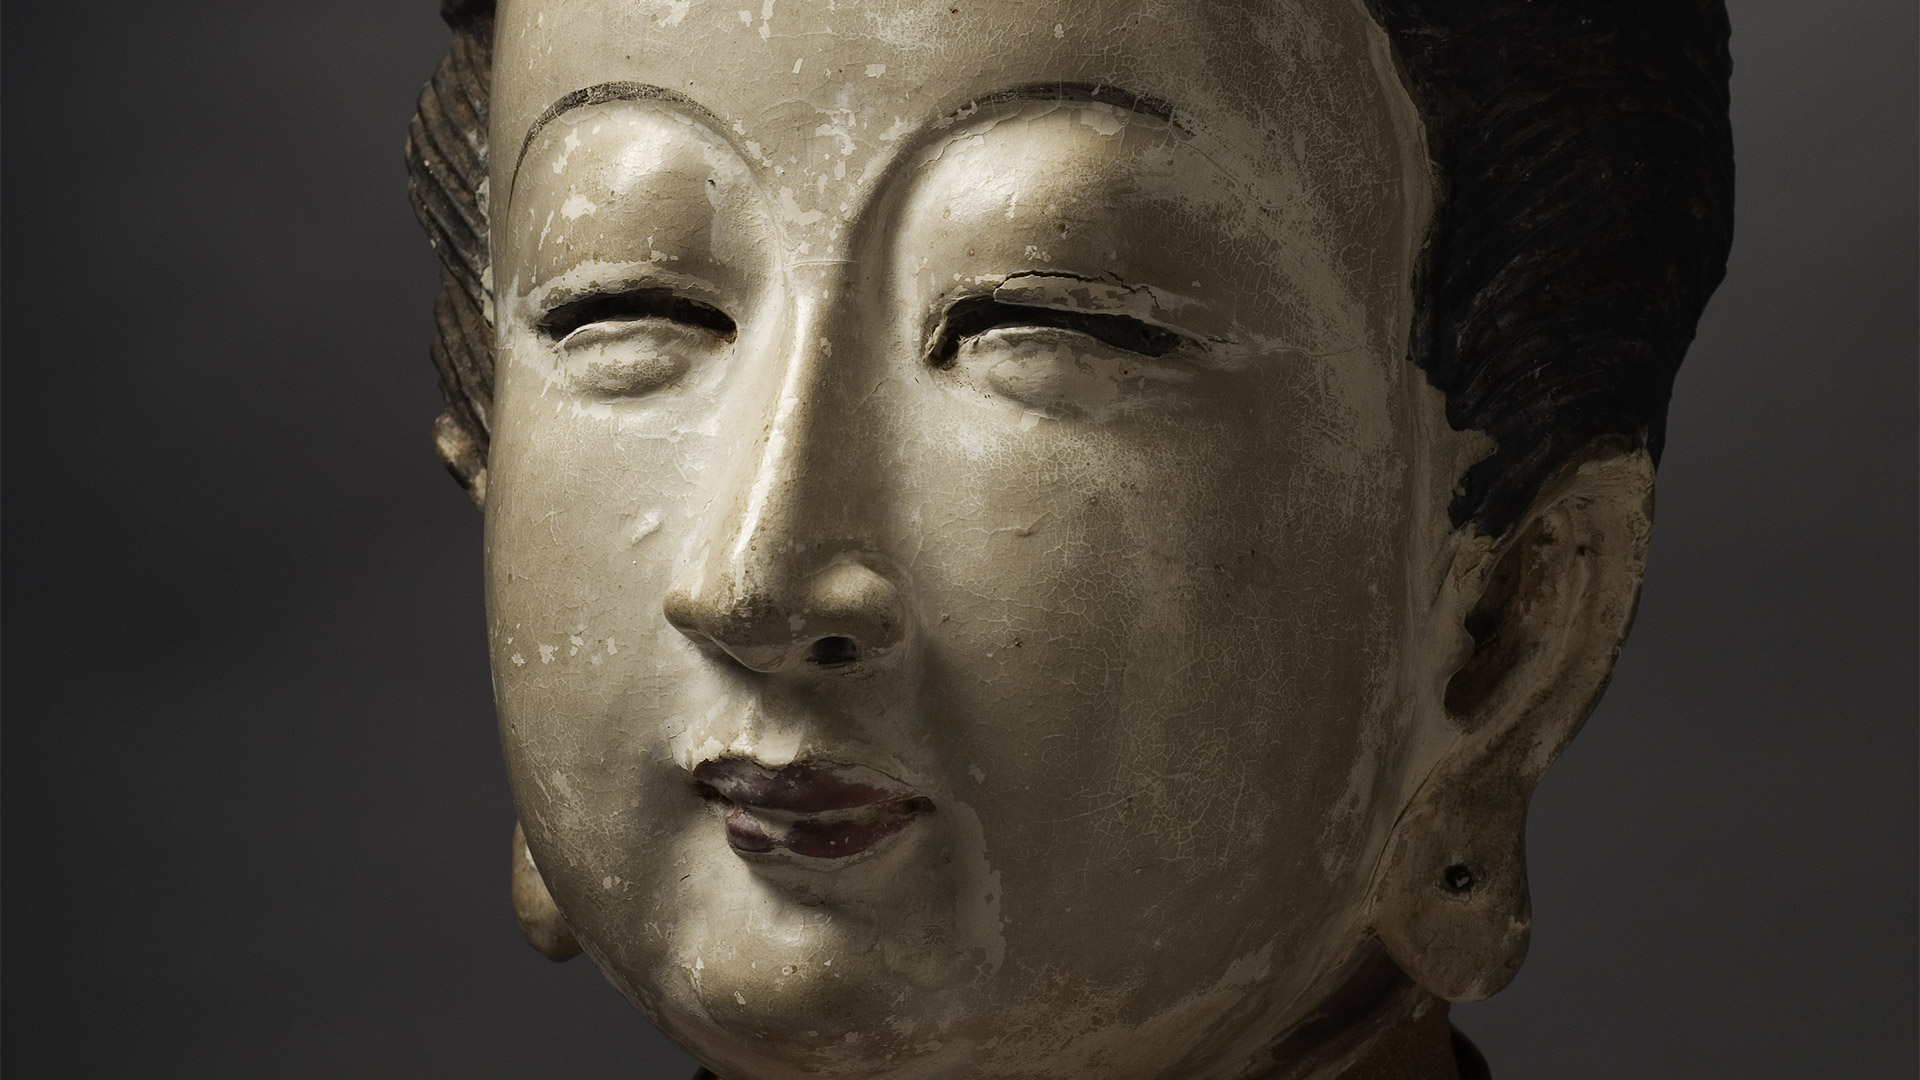 Exhibitions at the Museum of Far Eastern Antiquities